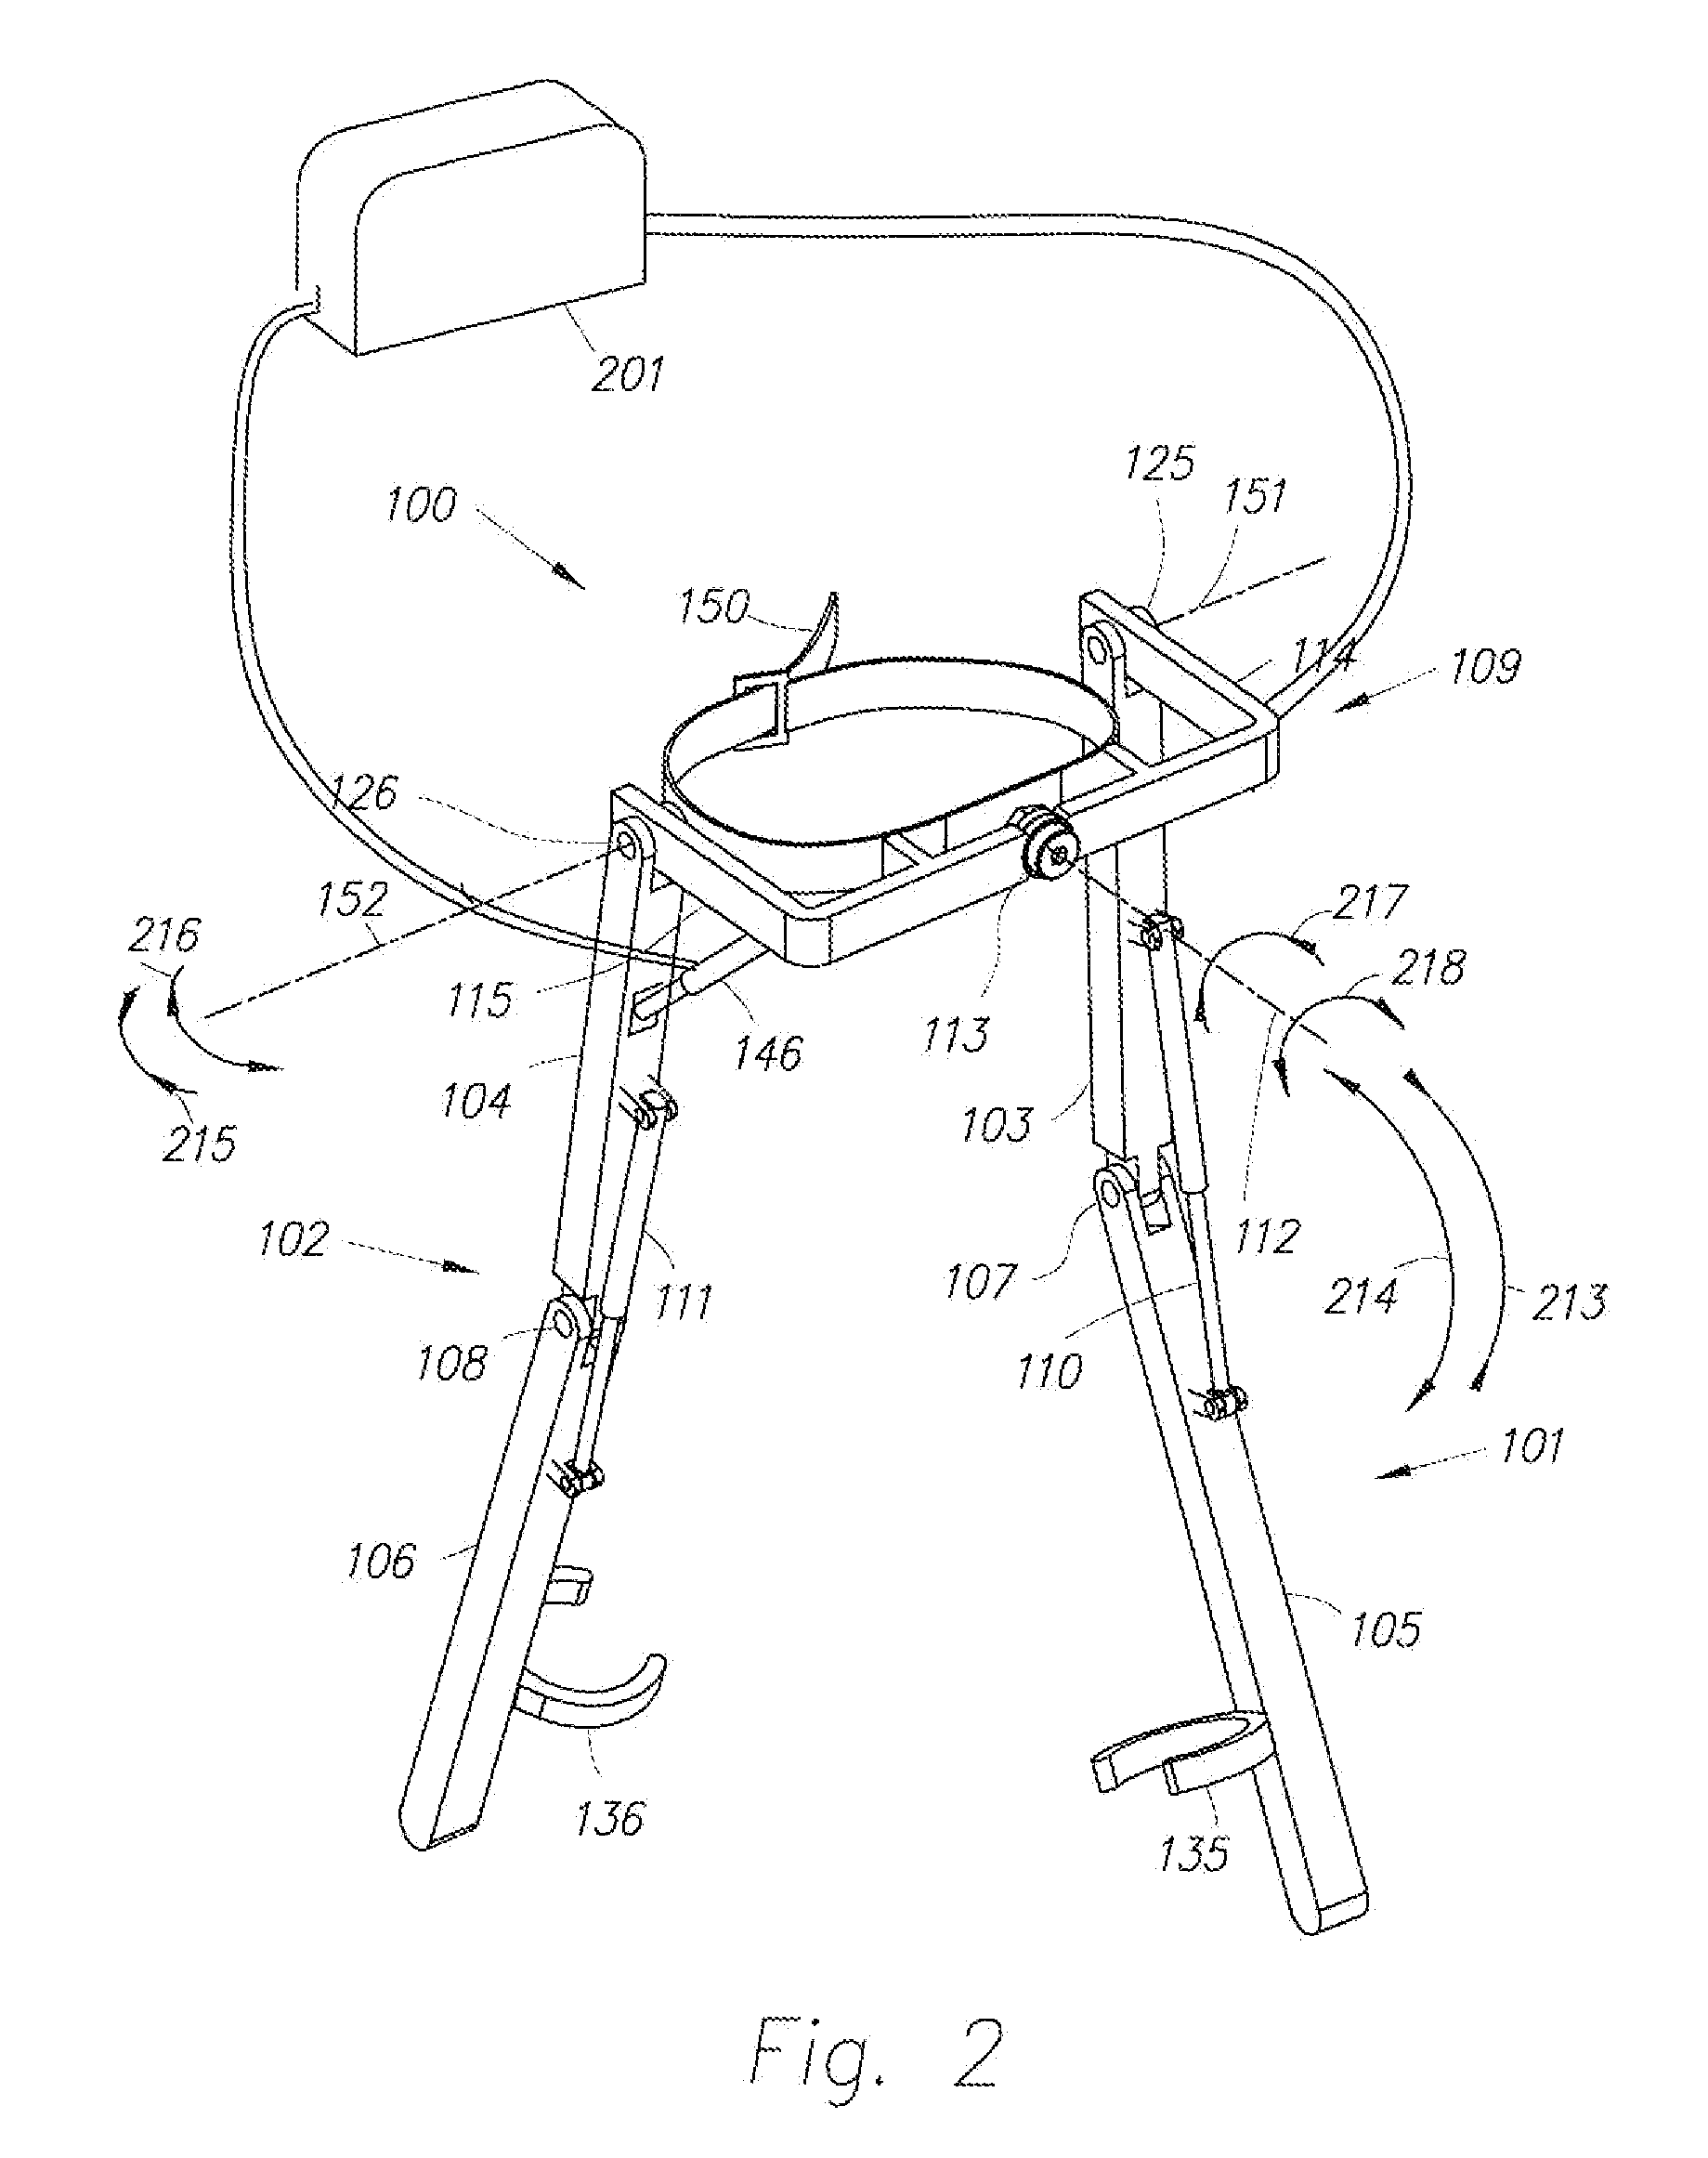 Device and Method for Decreasing Energy Consumption of a Person by Use of a Lower Extremity Exoskeleton